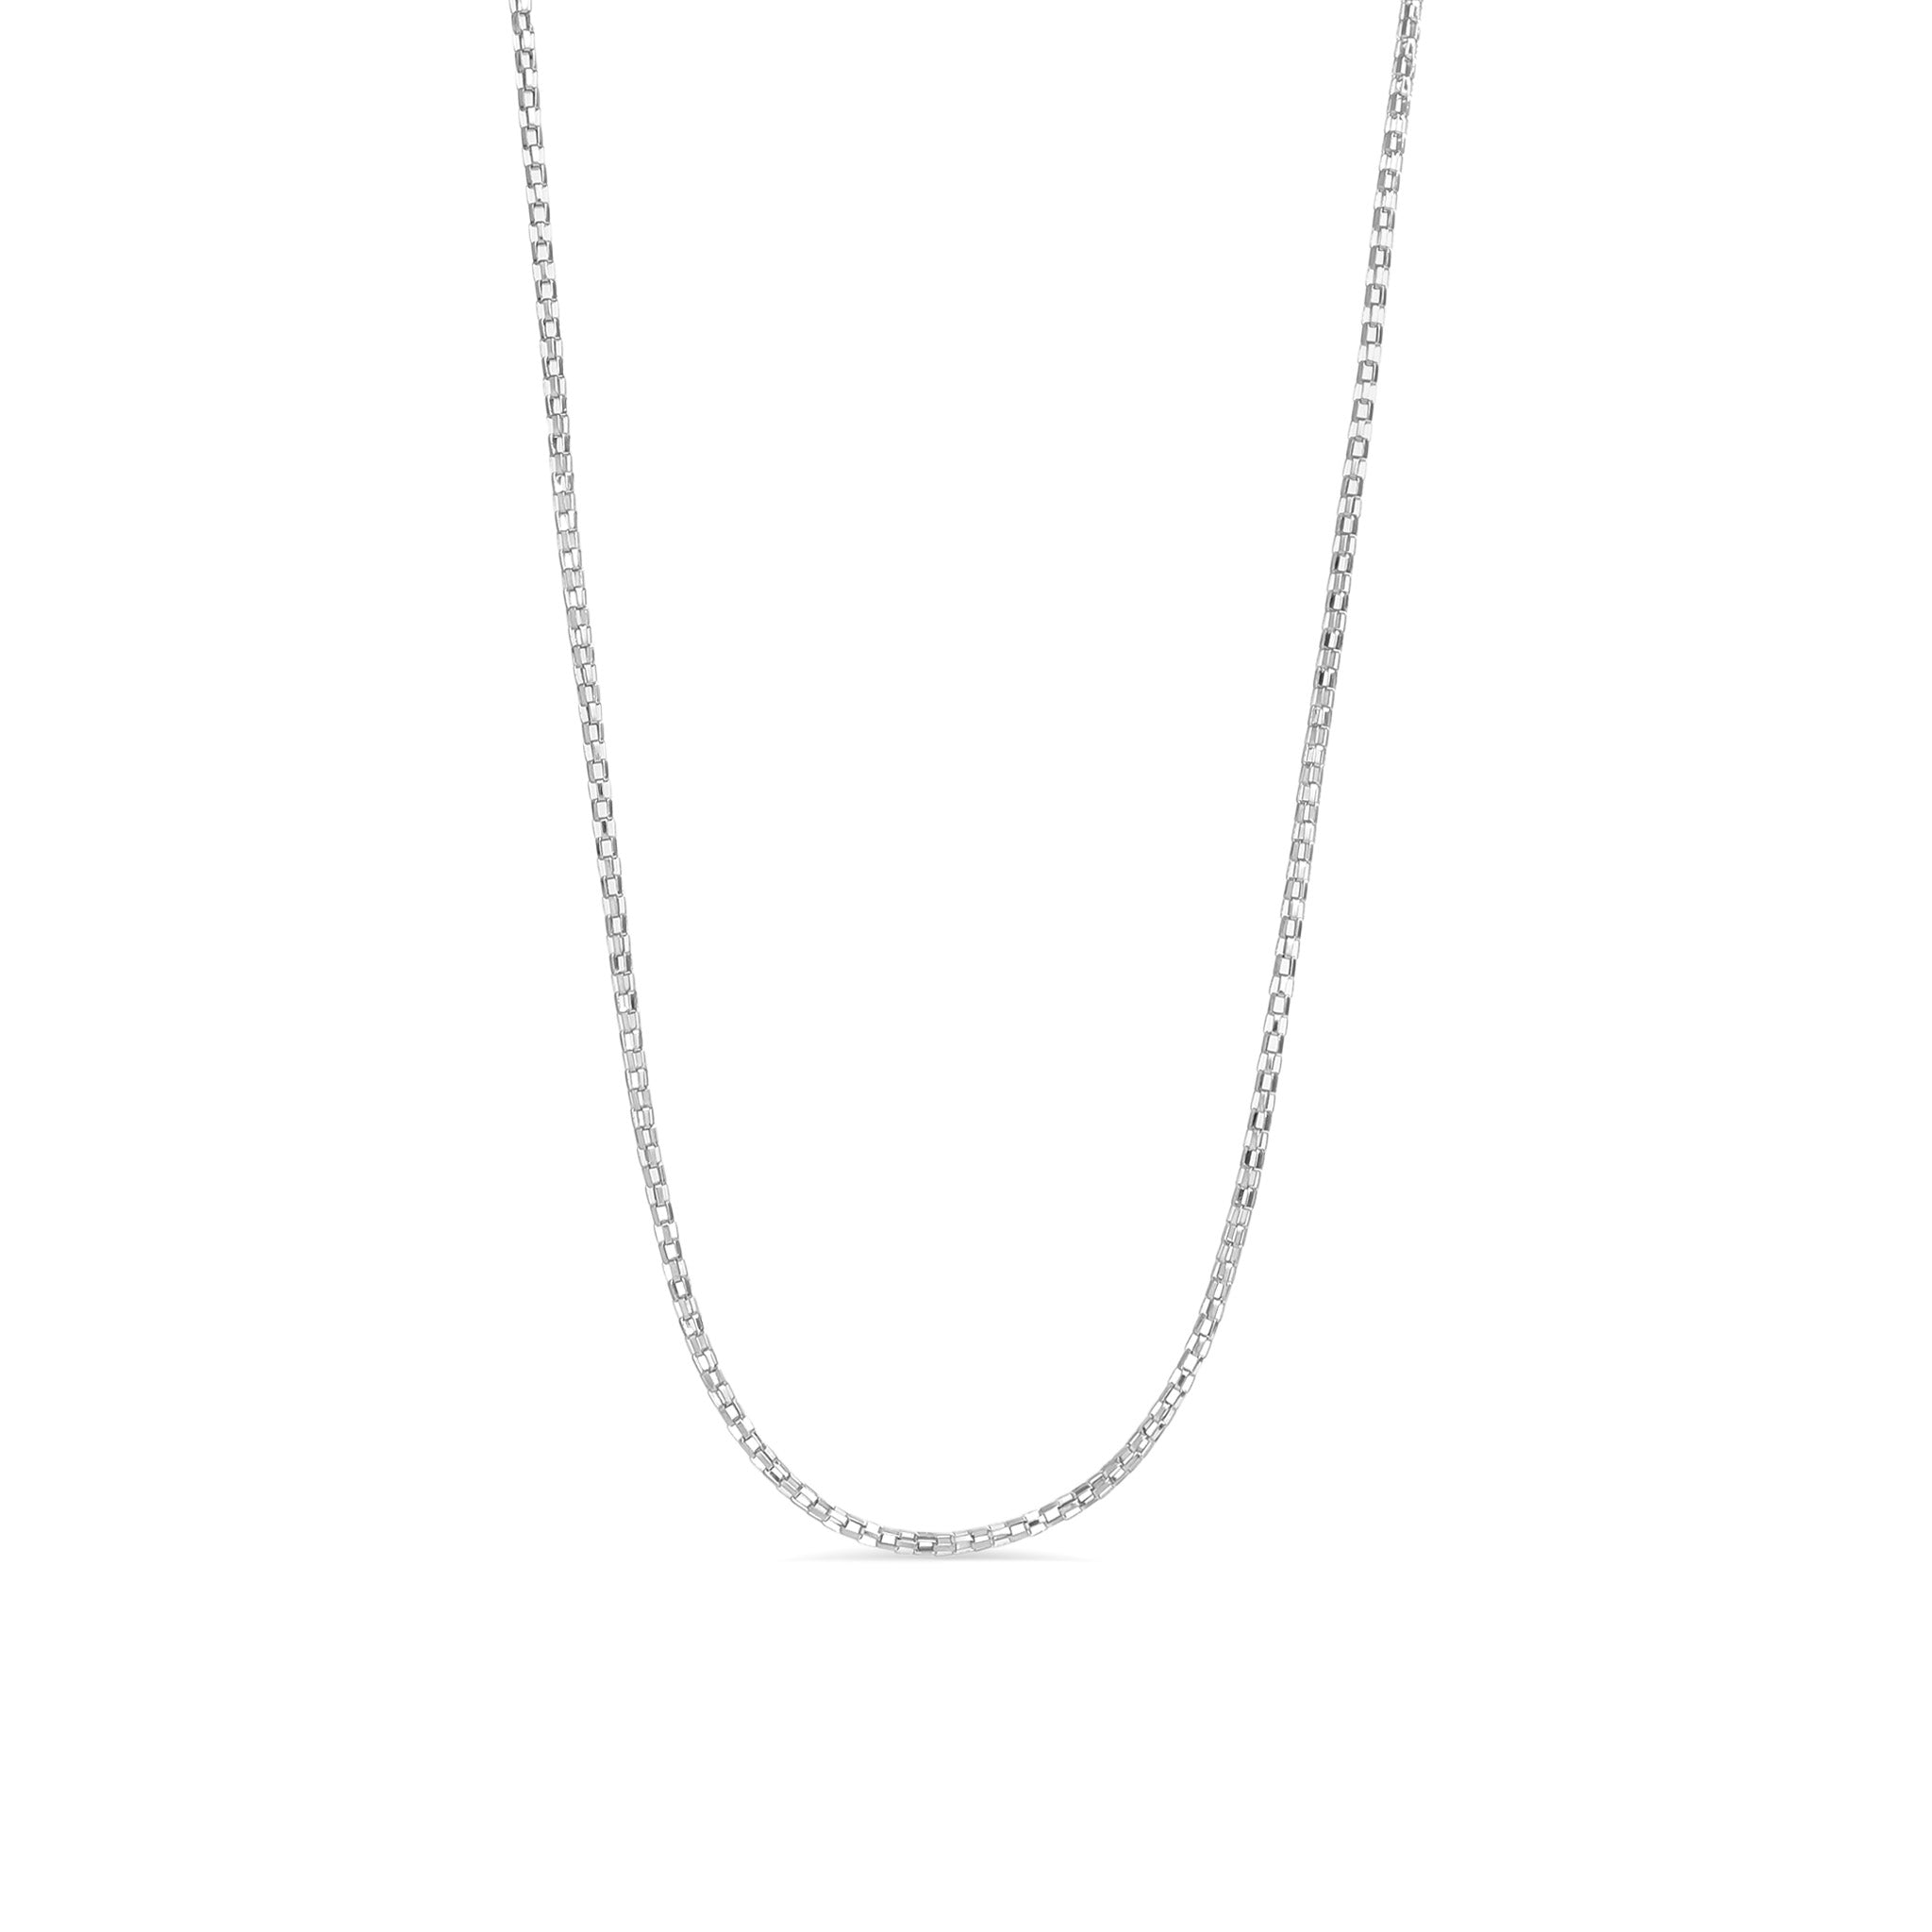 Stainless Steel Necklace / NKJ0003